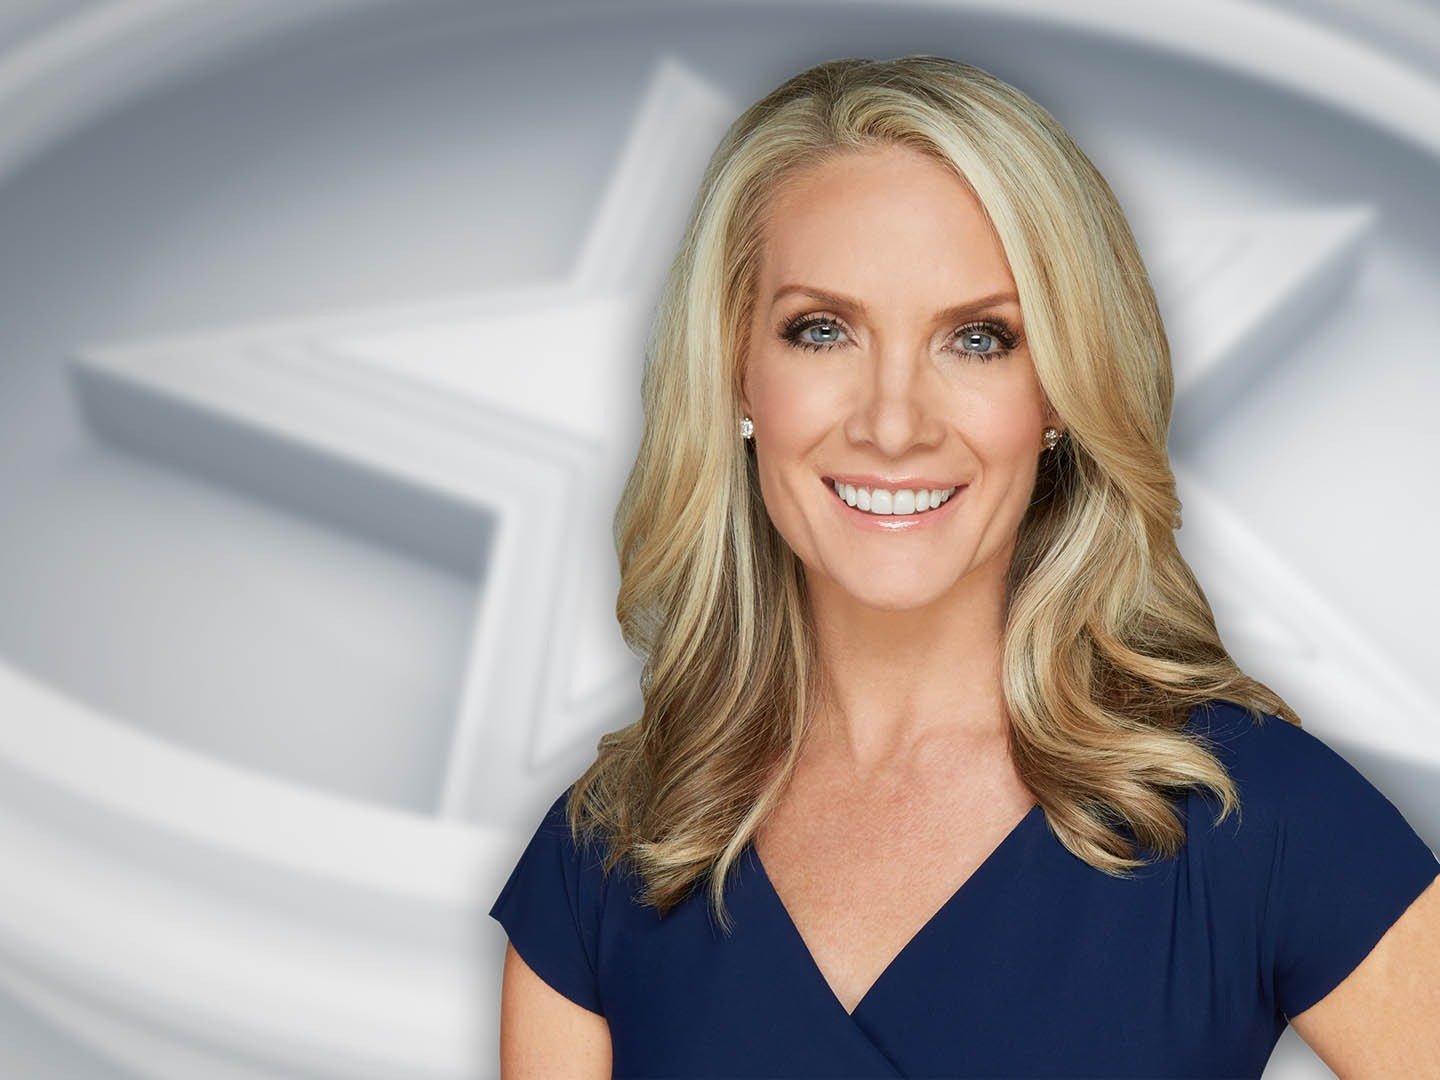 The Daily Briefing With Dana Perino.